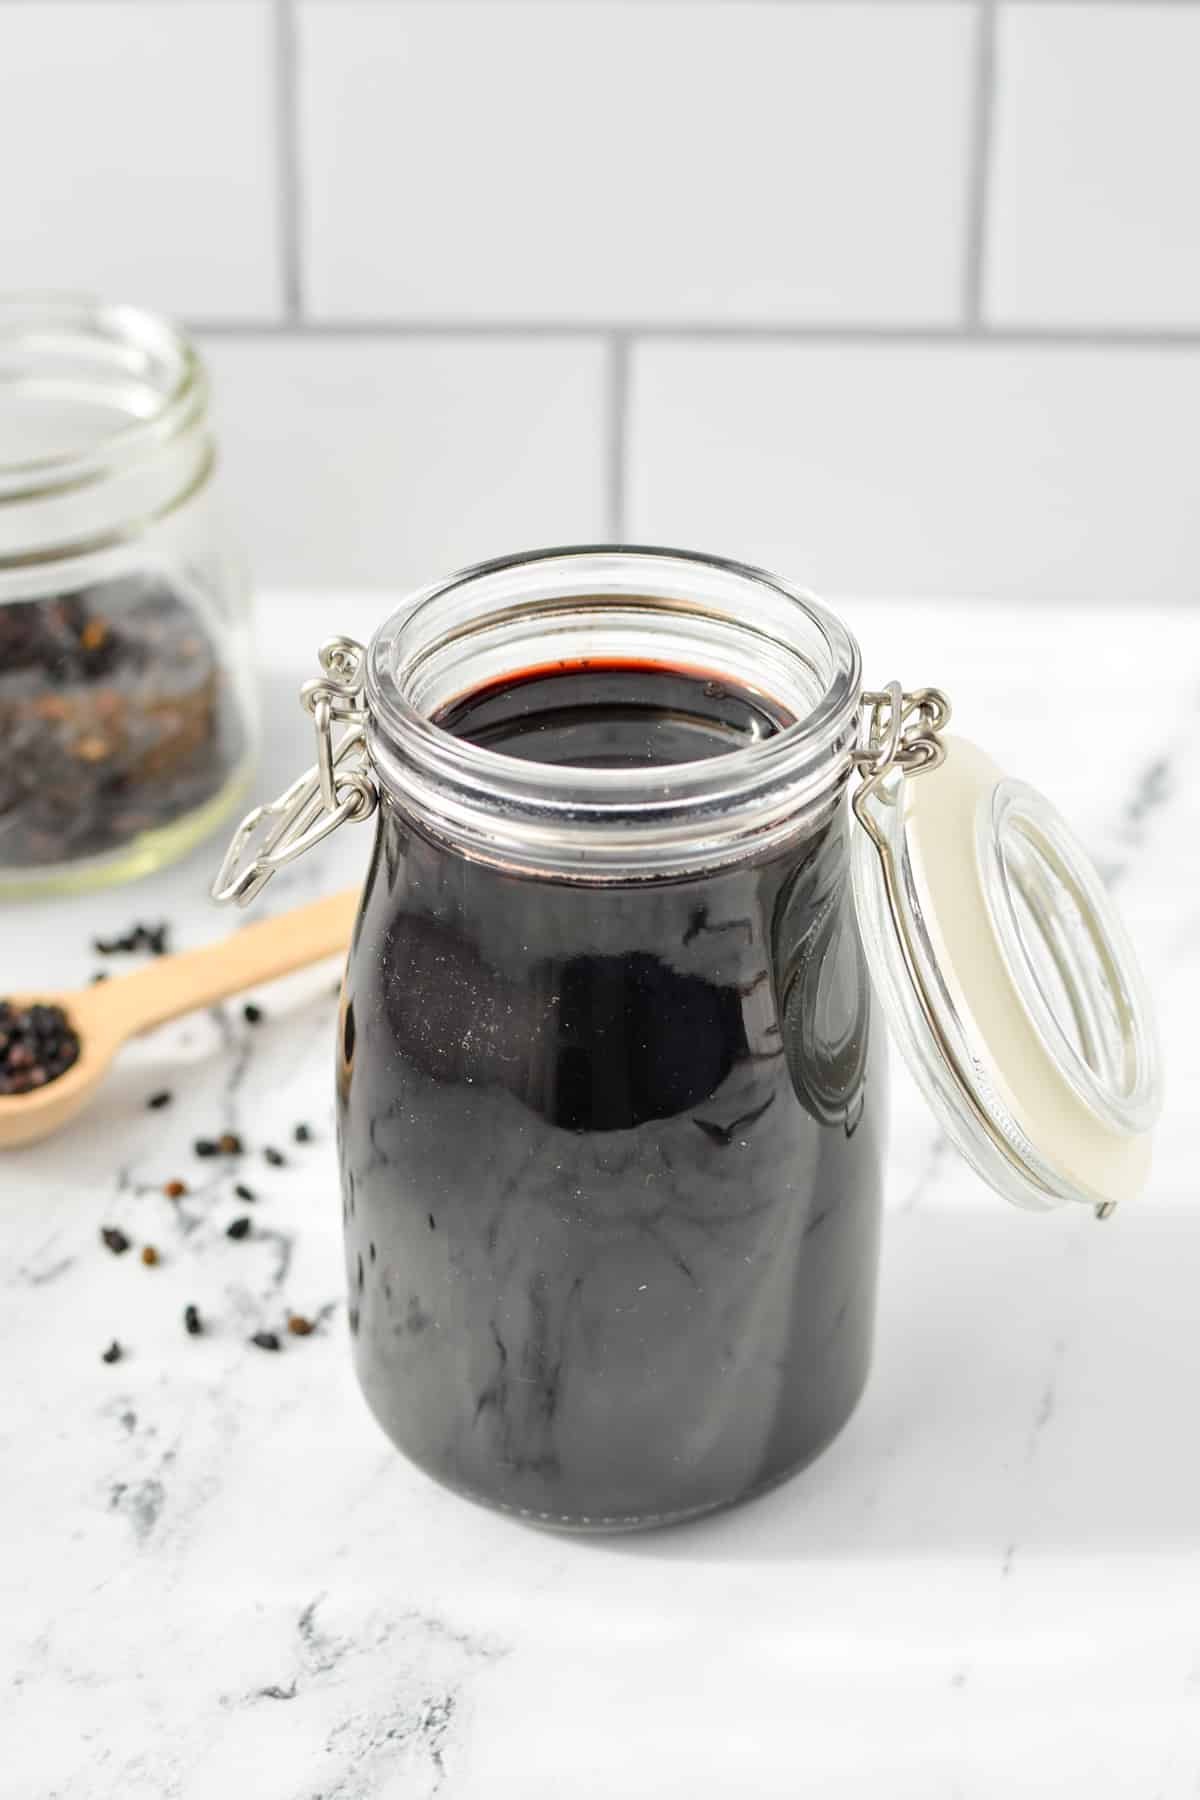 A jar filled with elderberry syrup, with elderberries scattered on the countertop behind it.